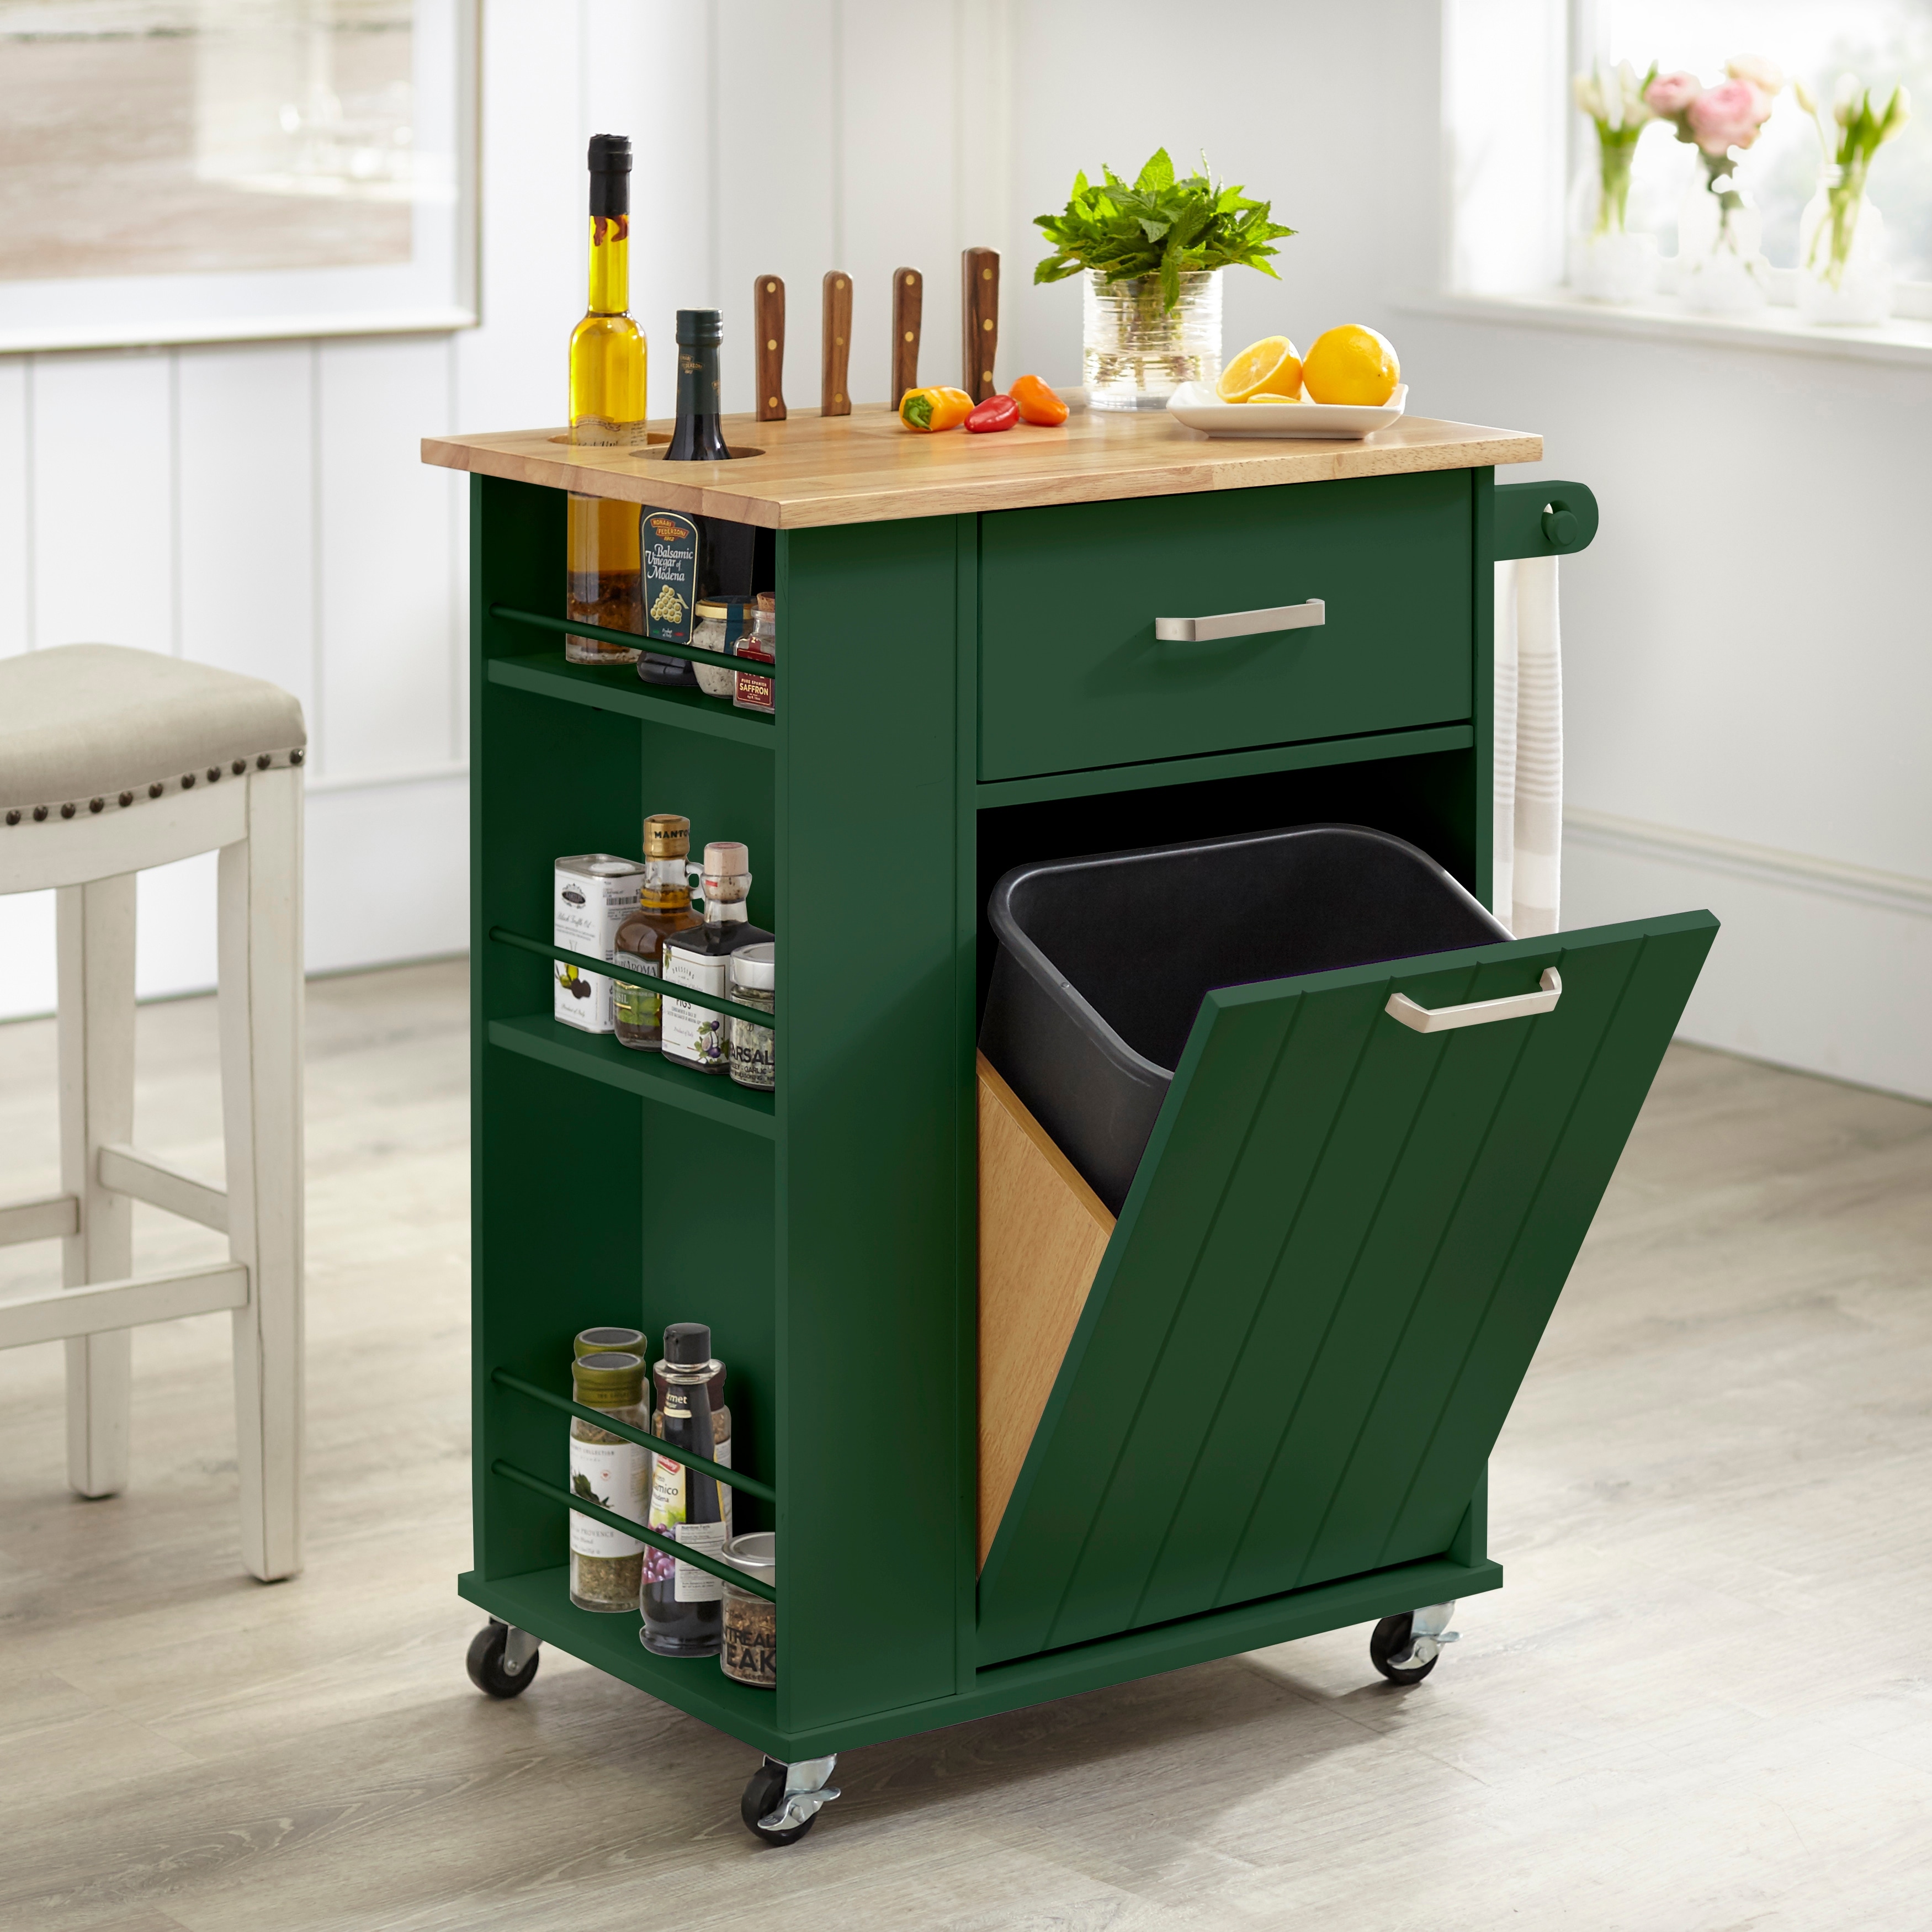 https://ak1.ostkcdn.com/images/products/is/images/direct/6ee5d11f3619c346f76b8e666f157ae13e2c685d/Simple-Living-Lima-Kitchen-Cart.jpg